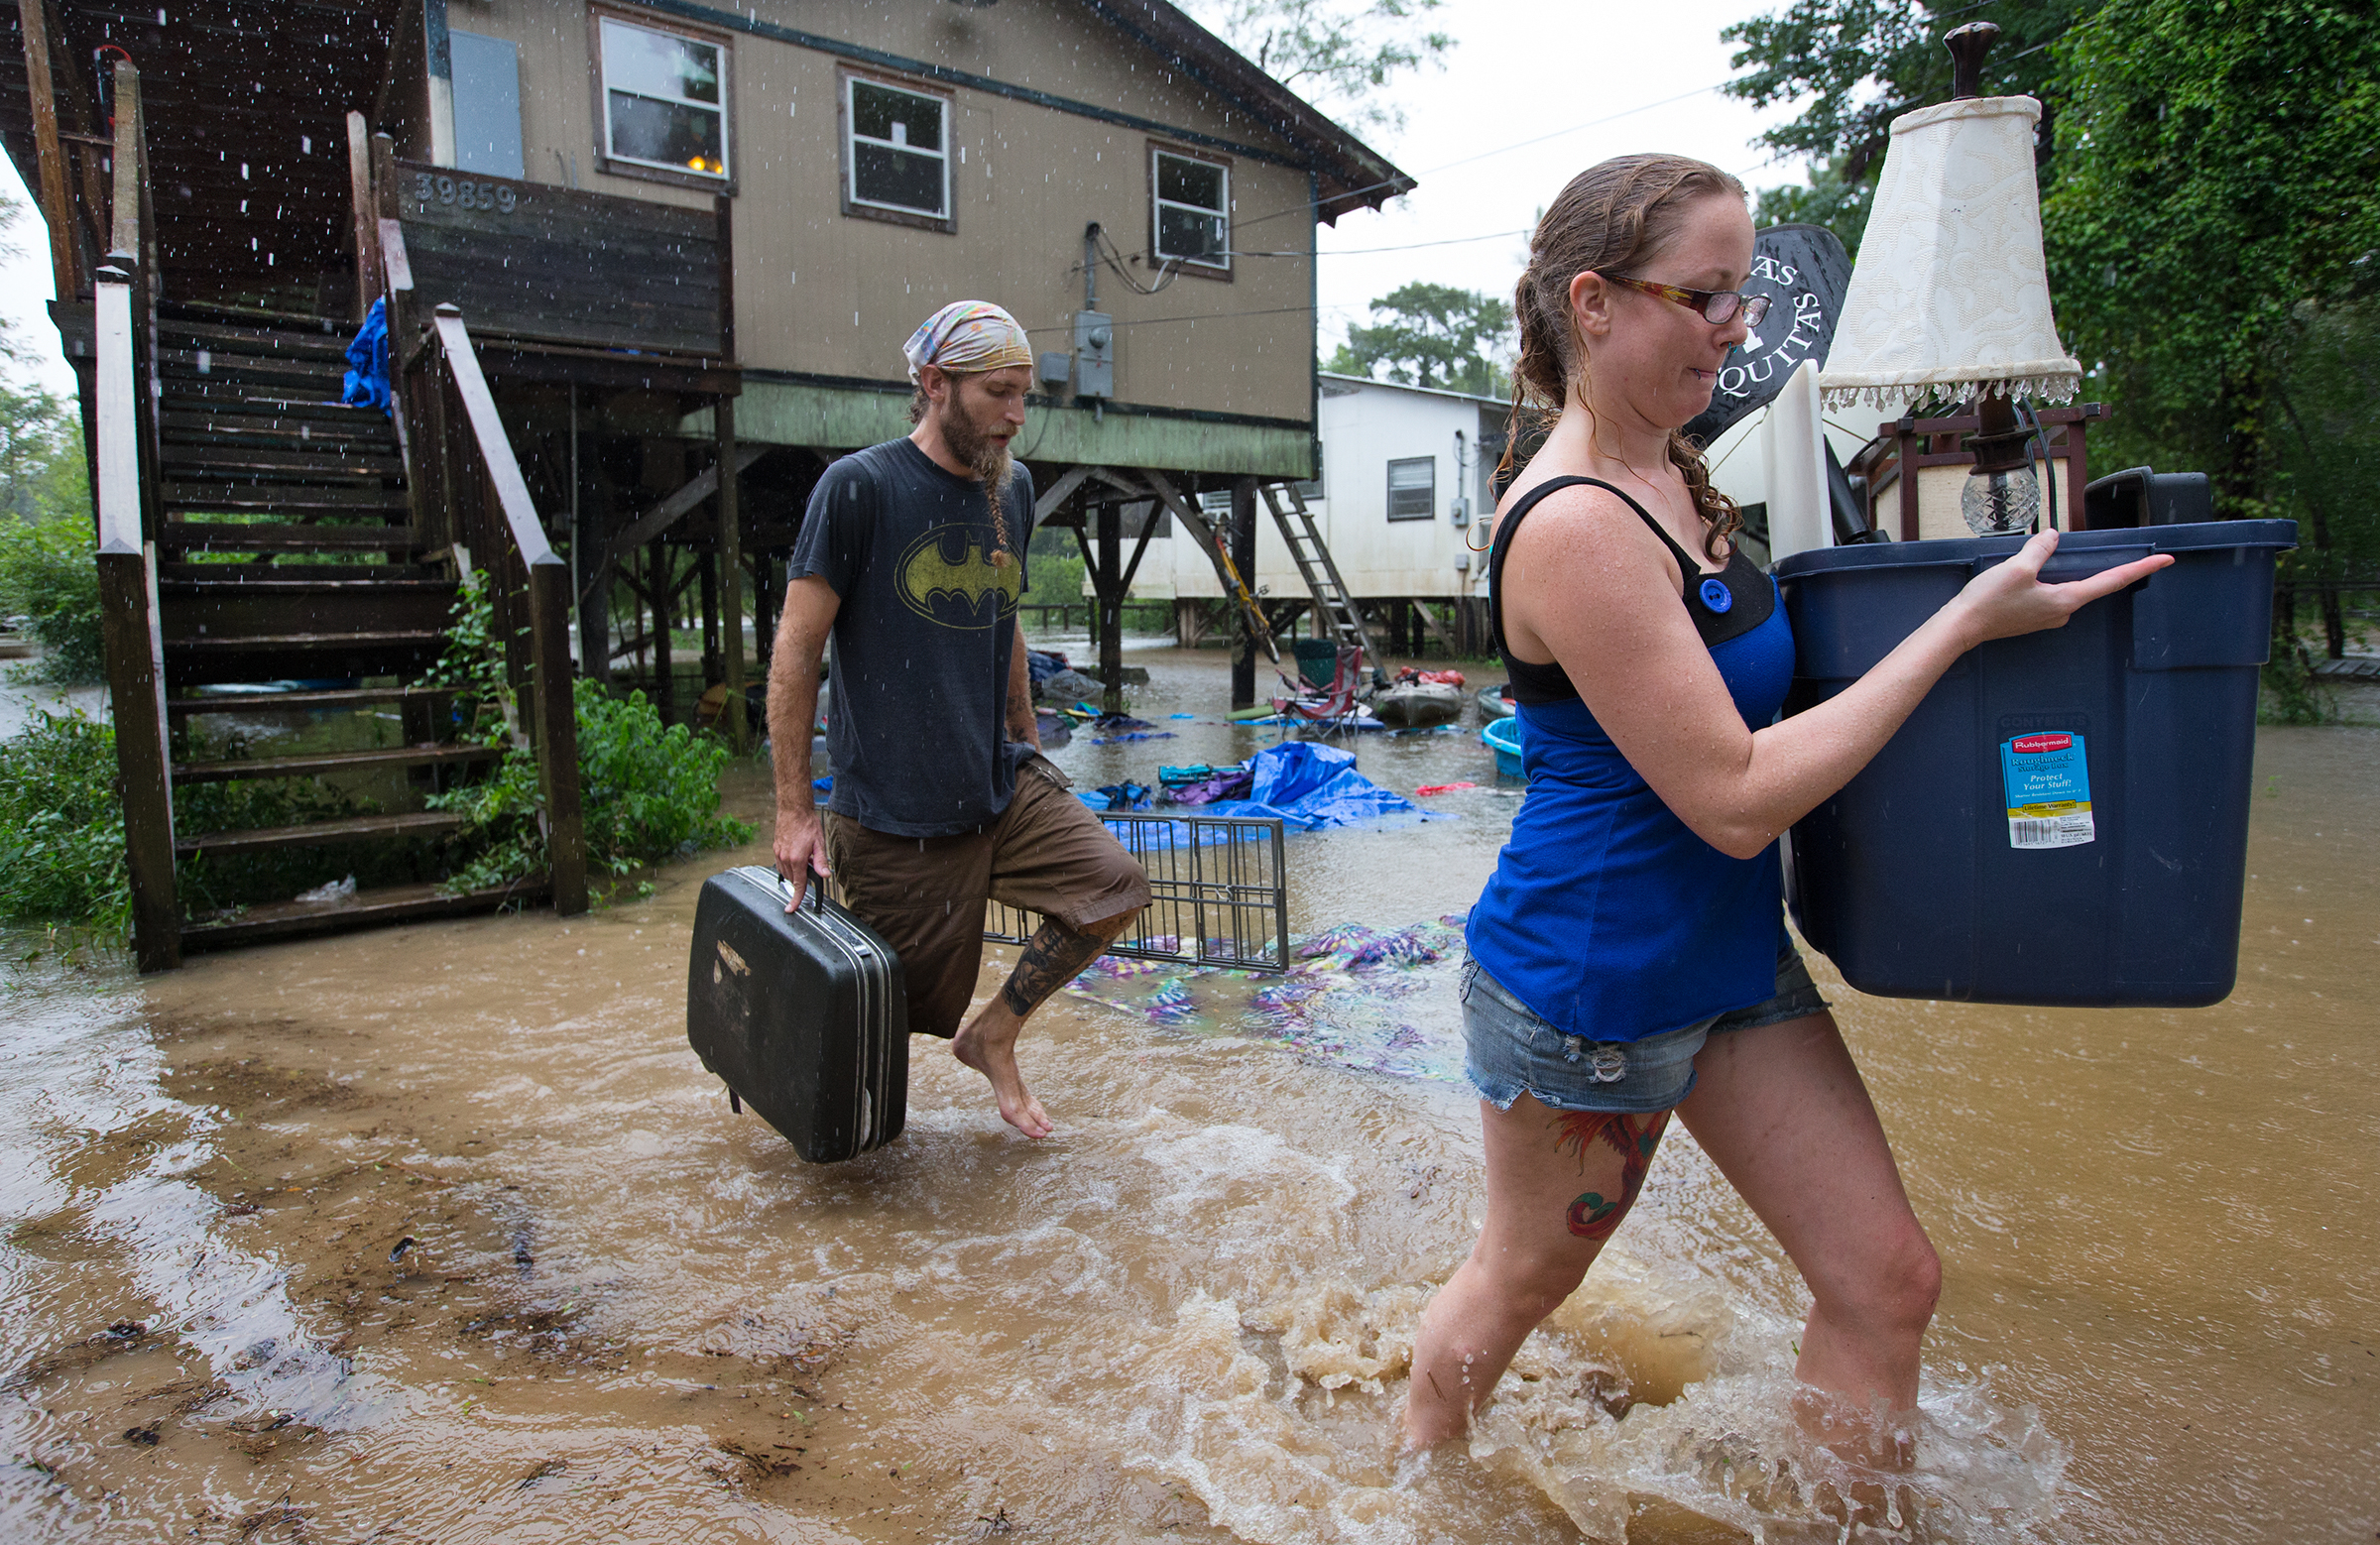 PHOTO: Getting out ahead of the flood, Michael Tramonte and Nikki Conger clear their possessions from their house on Watters Road, south of Hwy. 22 and east of Pontchatoula, Louisiana, as storms pound Tangipahoa Parish, Aug. 12, 2016. 